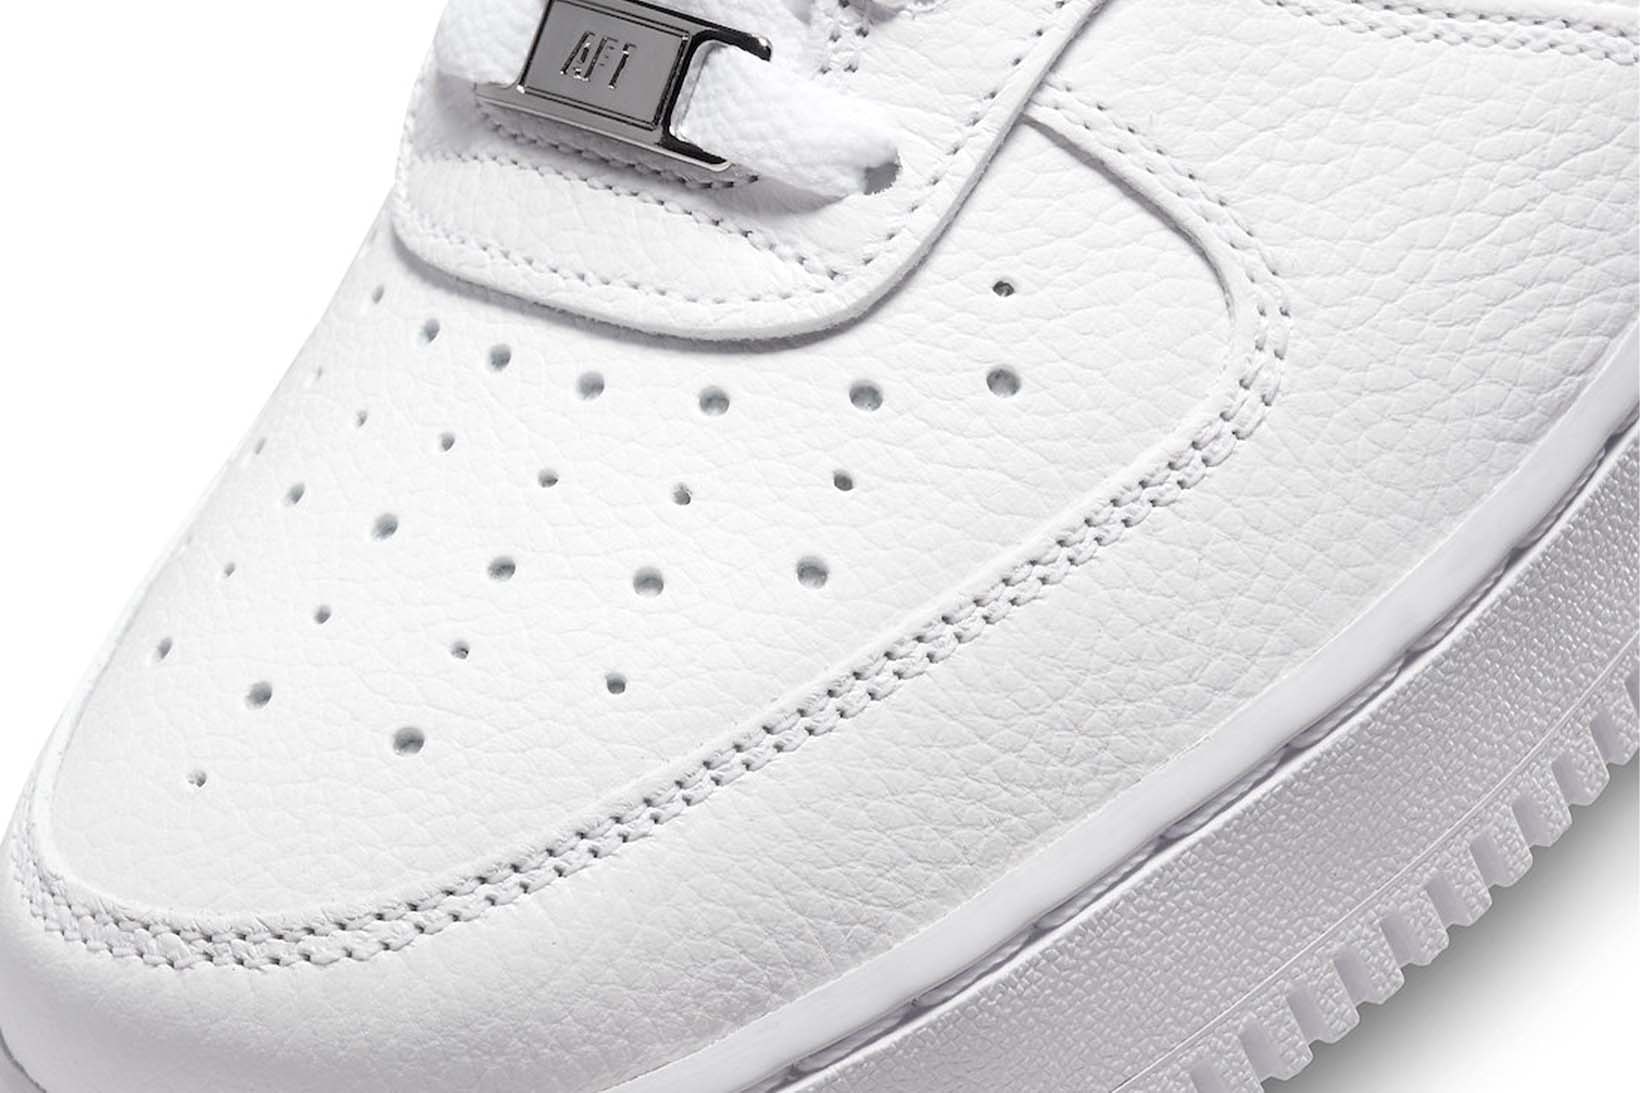 Drake's NOCTA x Nike Air Force 1 Low Release Date Confirmed